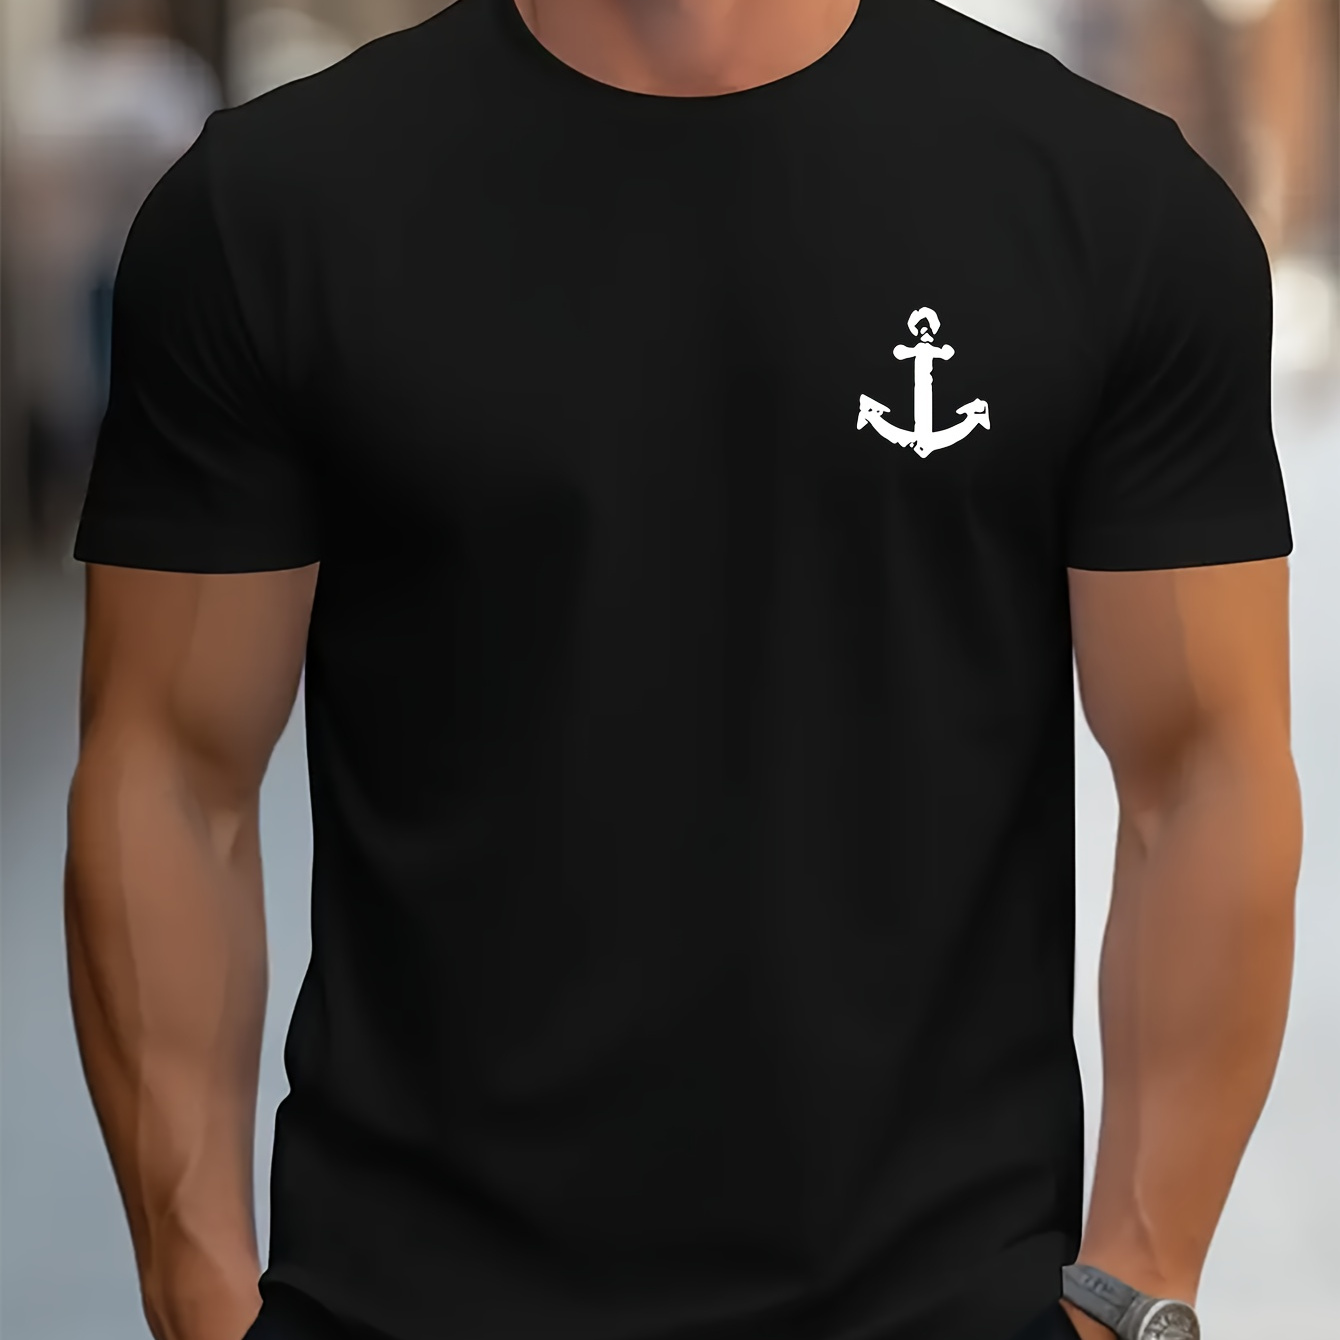 

Men's Casual Crew Neck Graphic T-shirt With Fancy Anchor Print, Trendy Short Sleeve Top For Summer Daily Wear